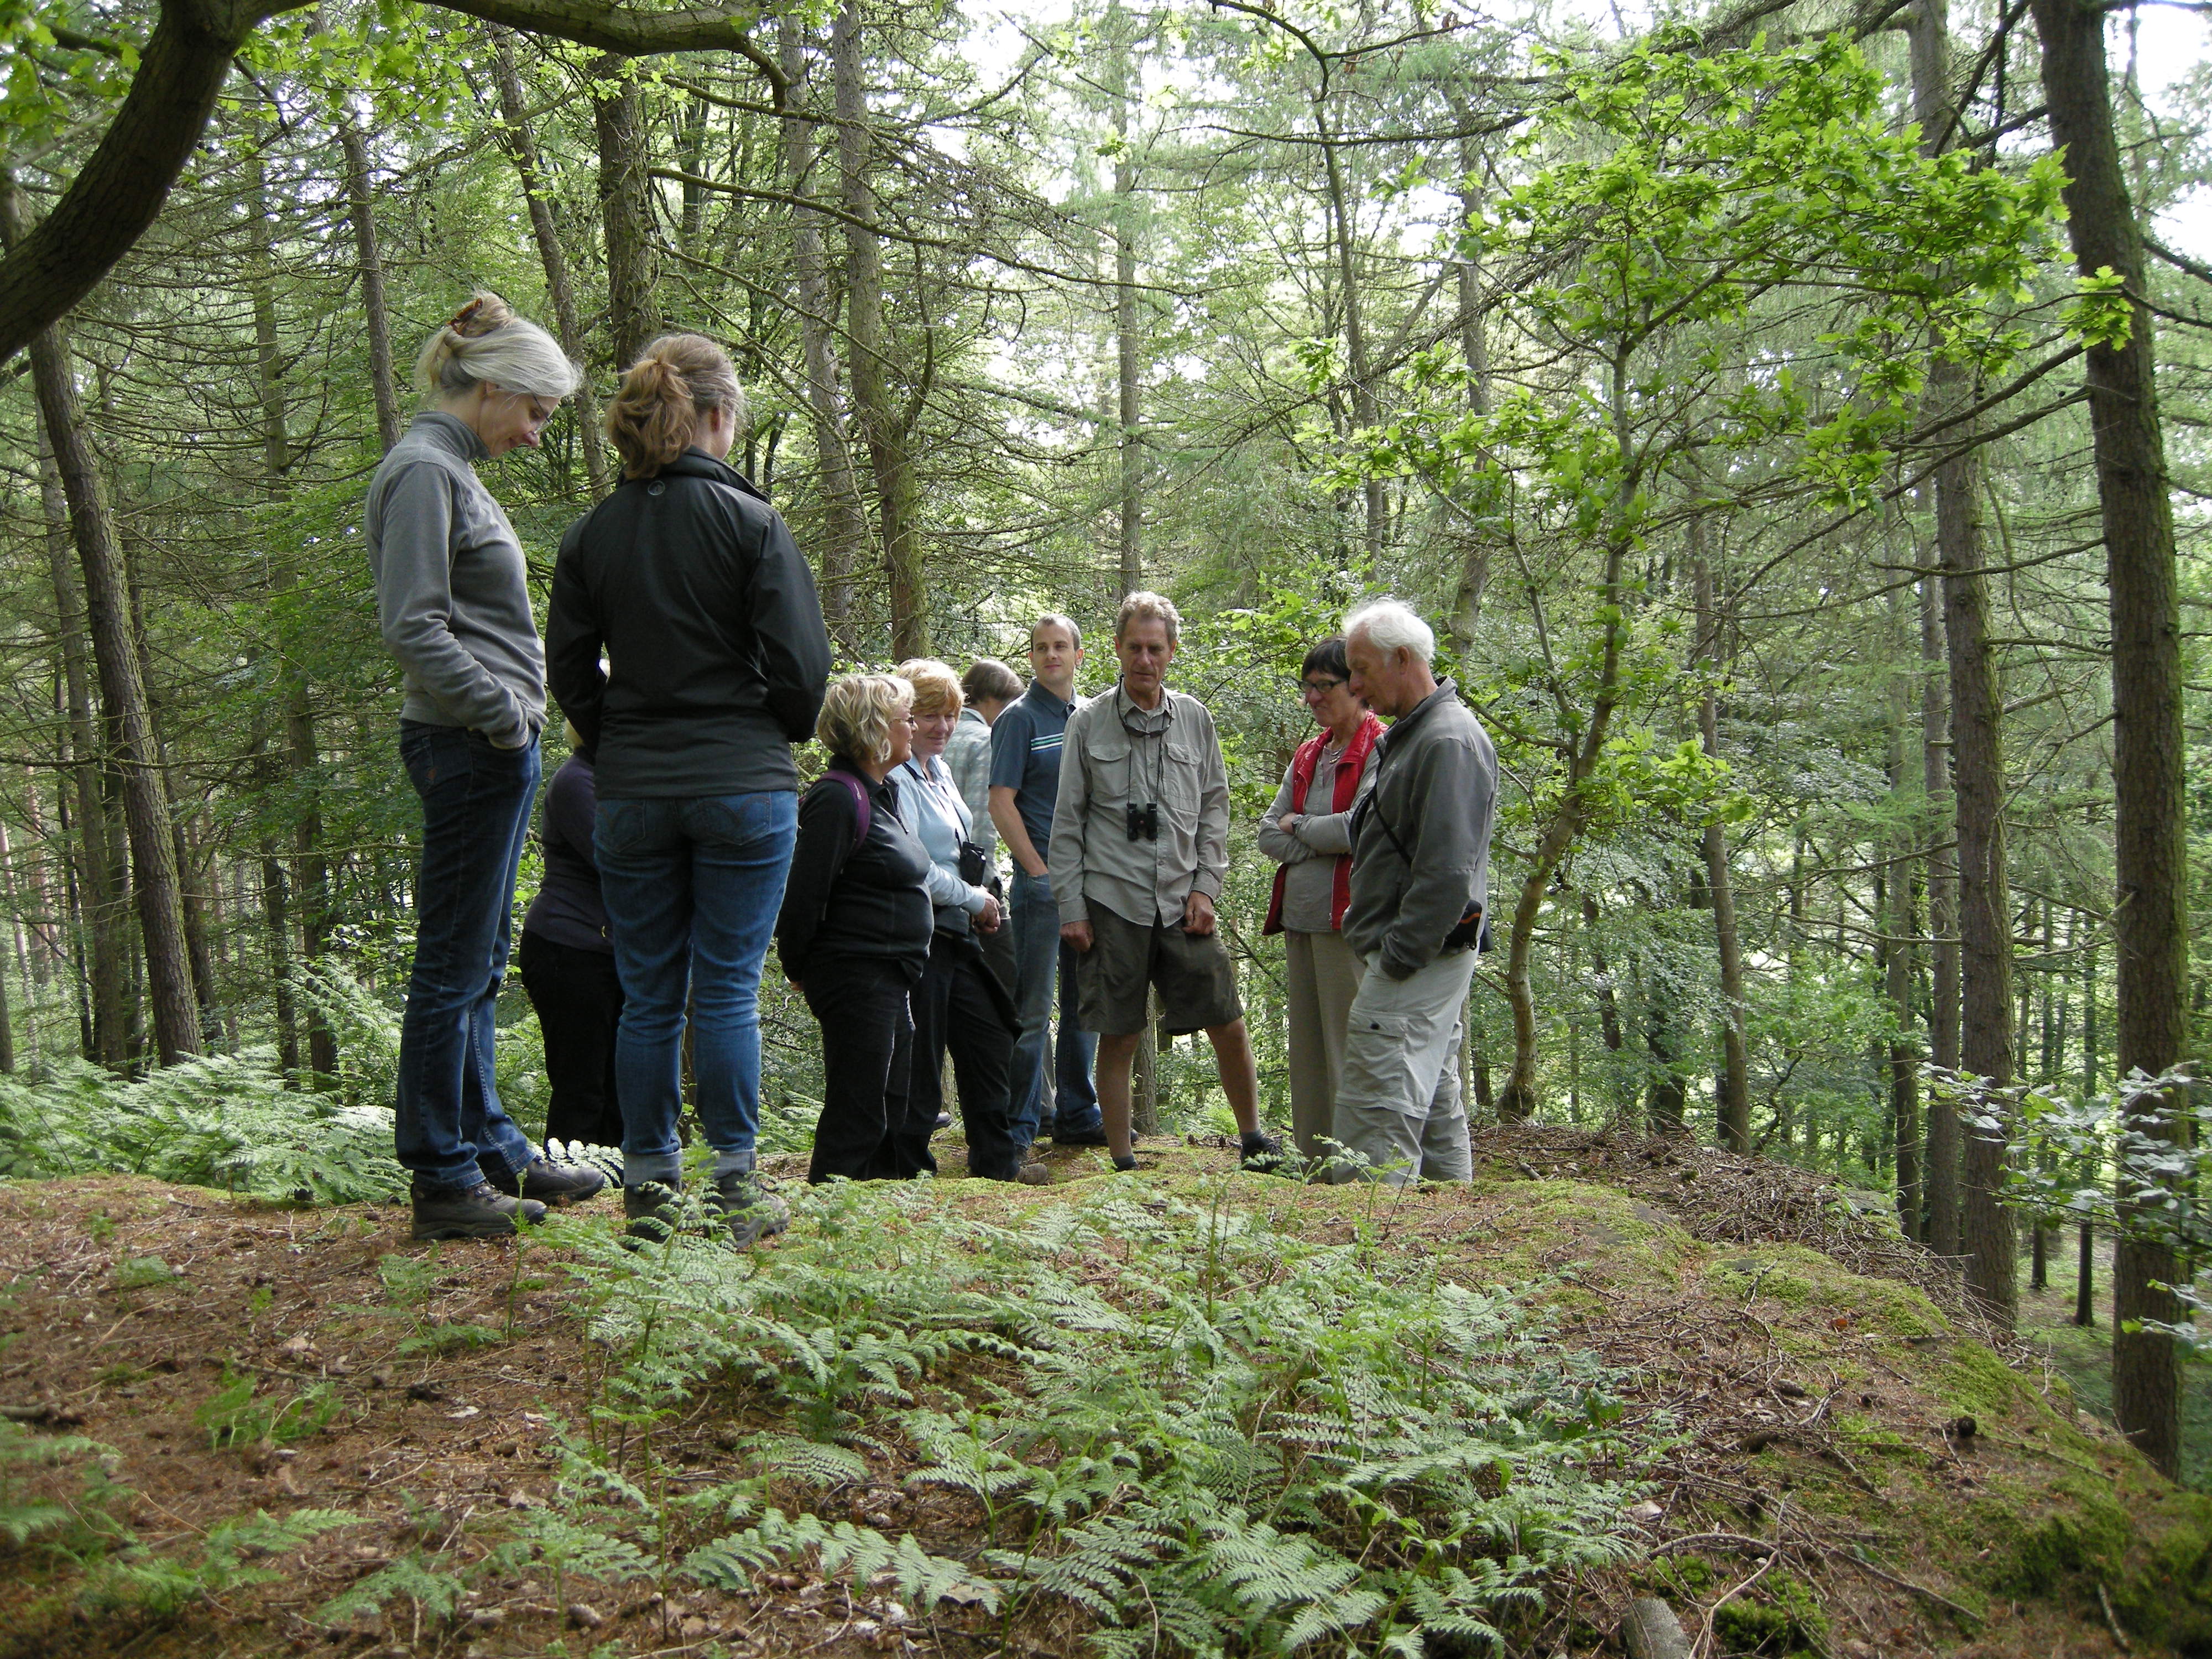 The Trust's walk to Liz Parr's Wood near Plumpton was enjoyed by all.